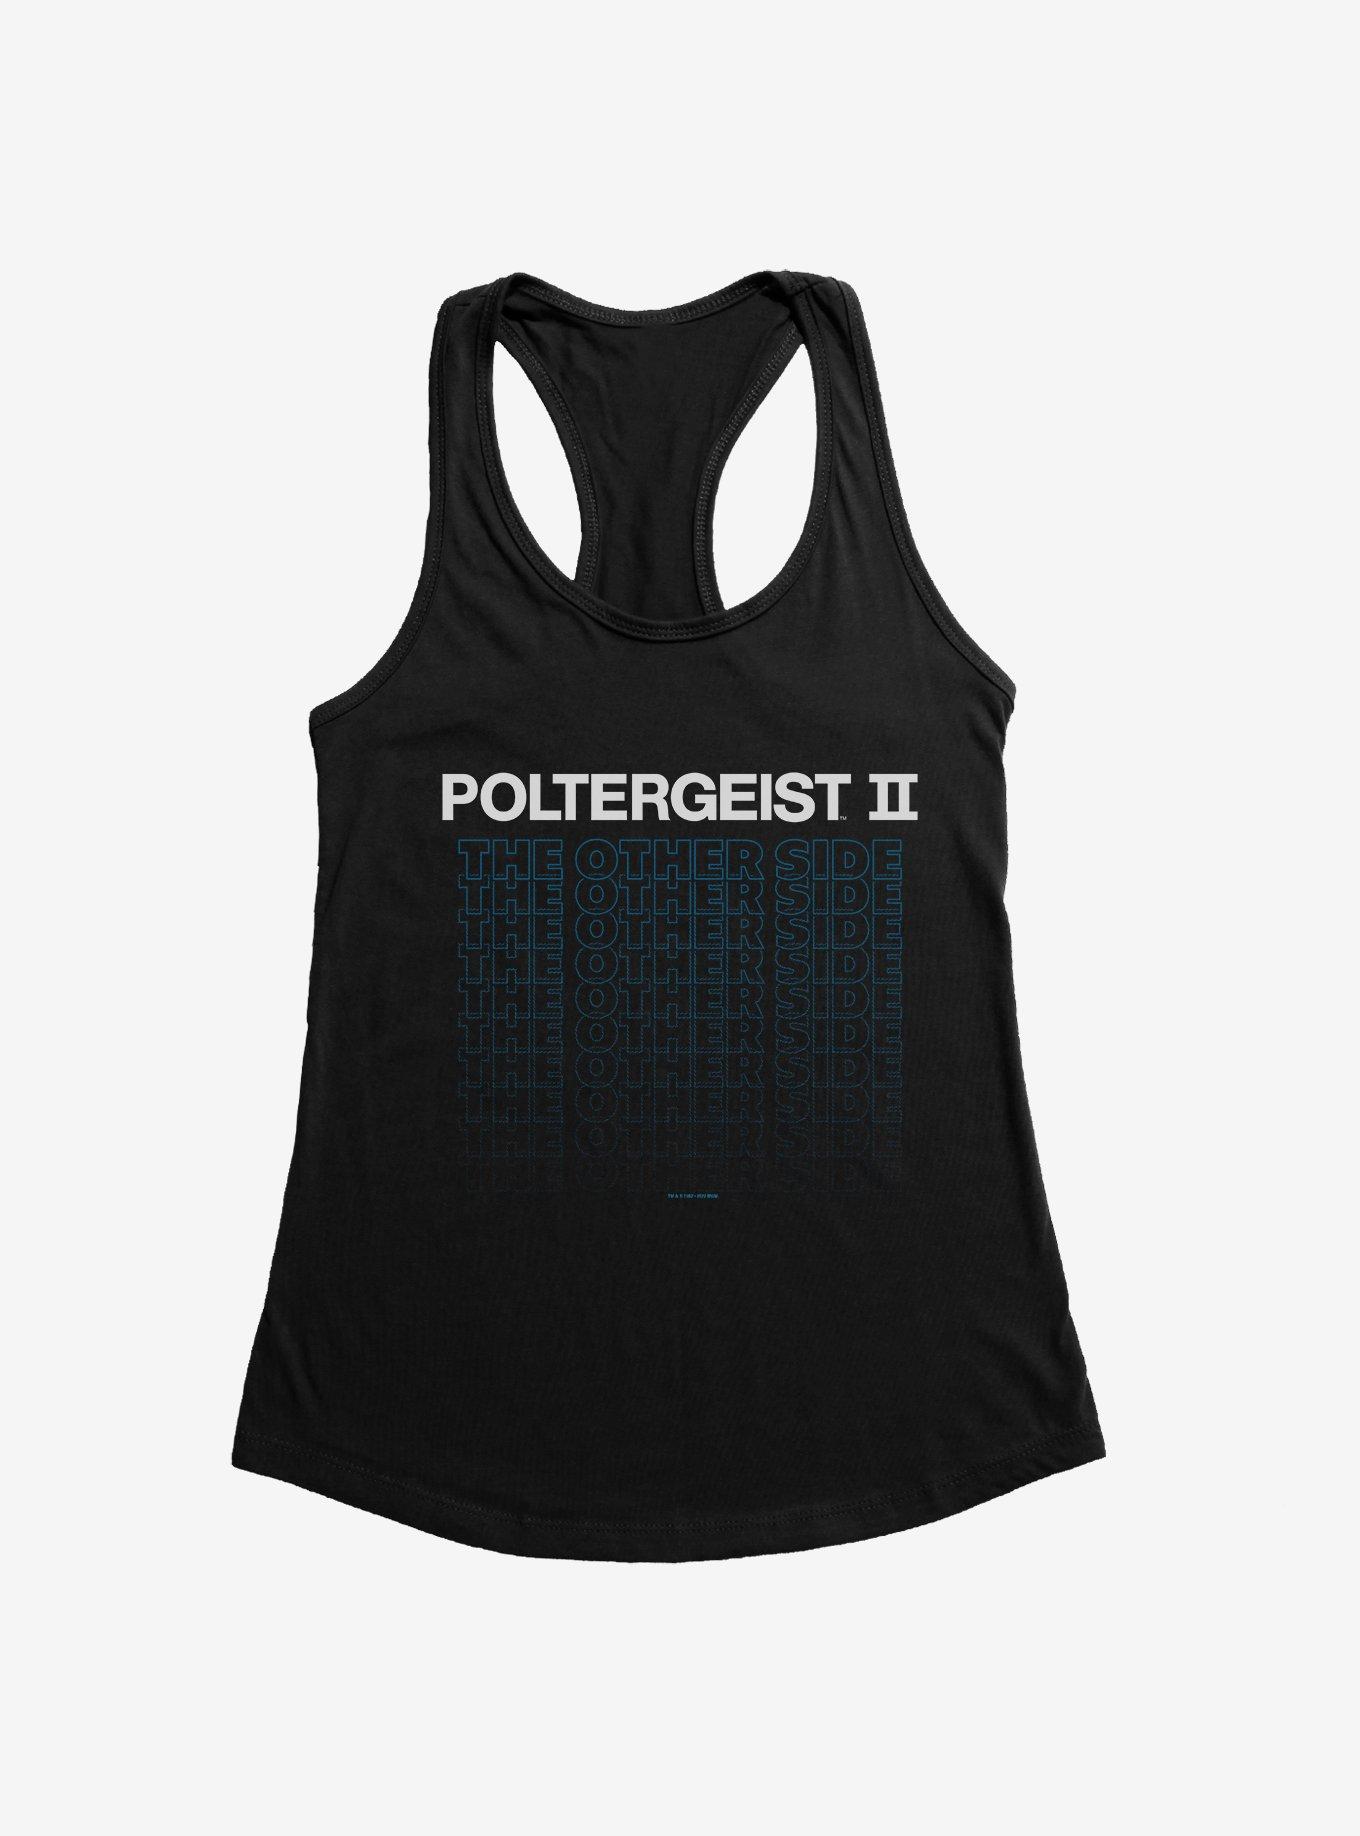 Poltergeist II The Other Side Girls Tank